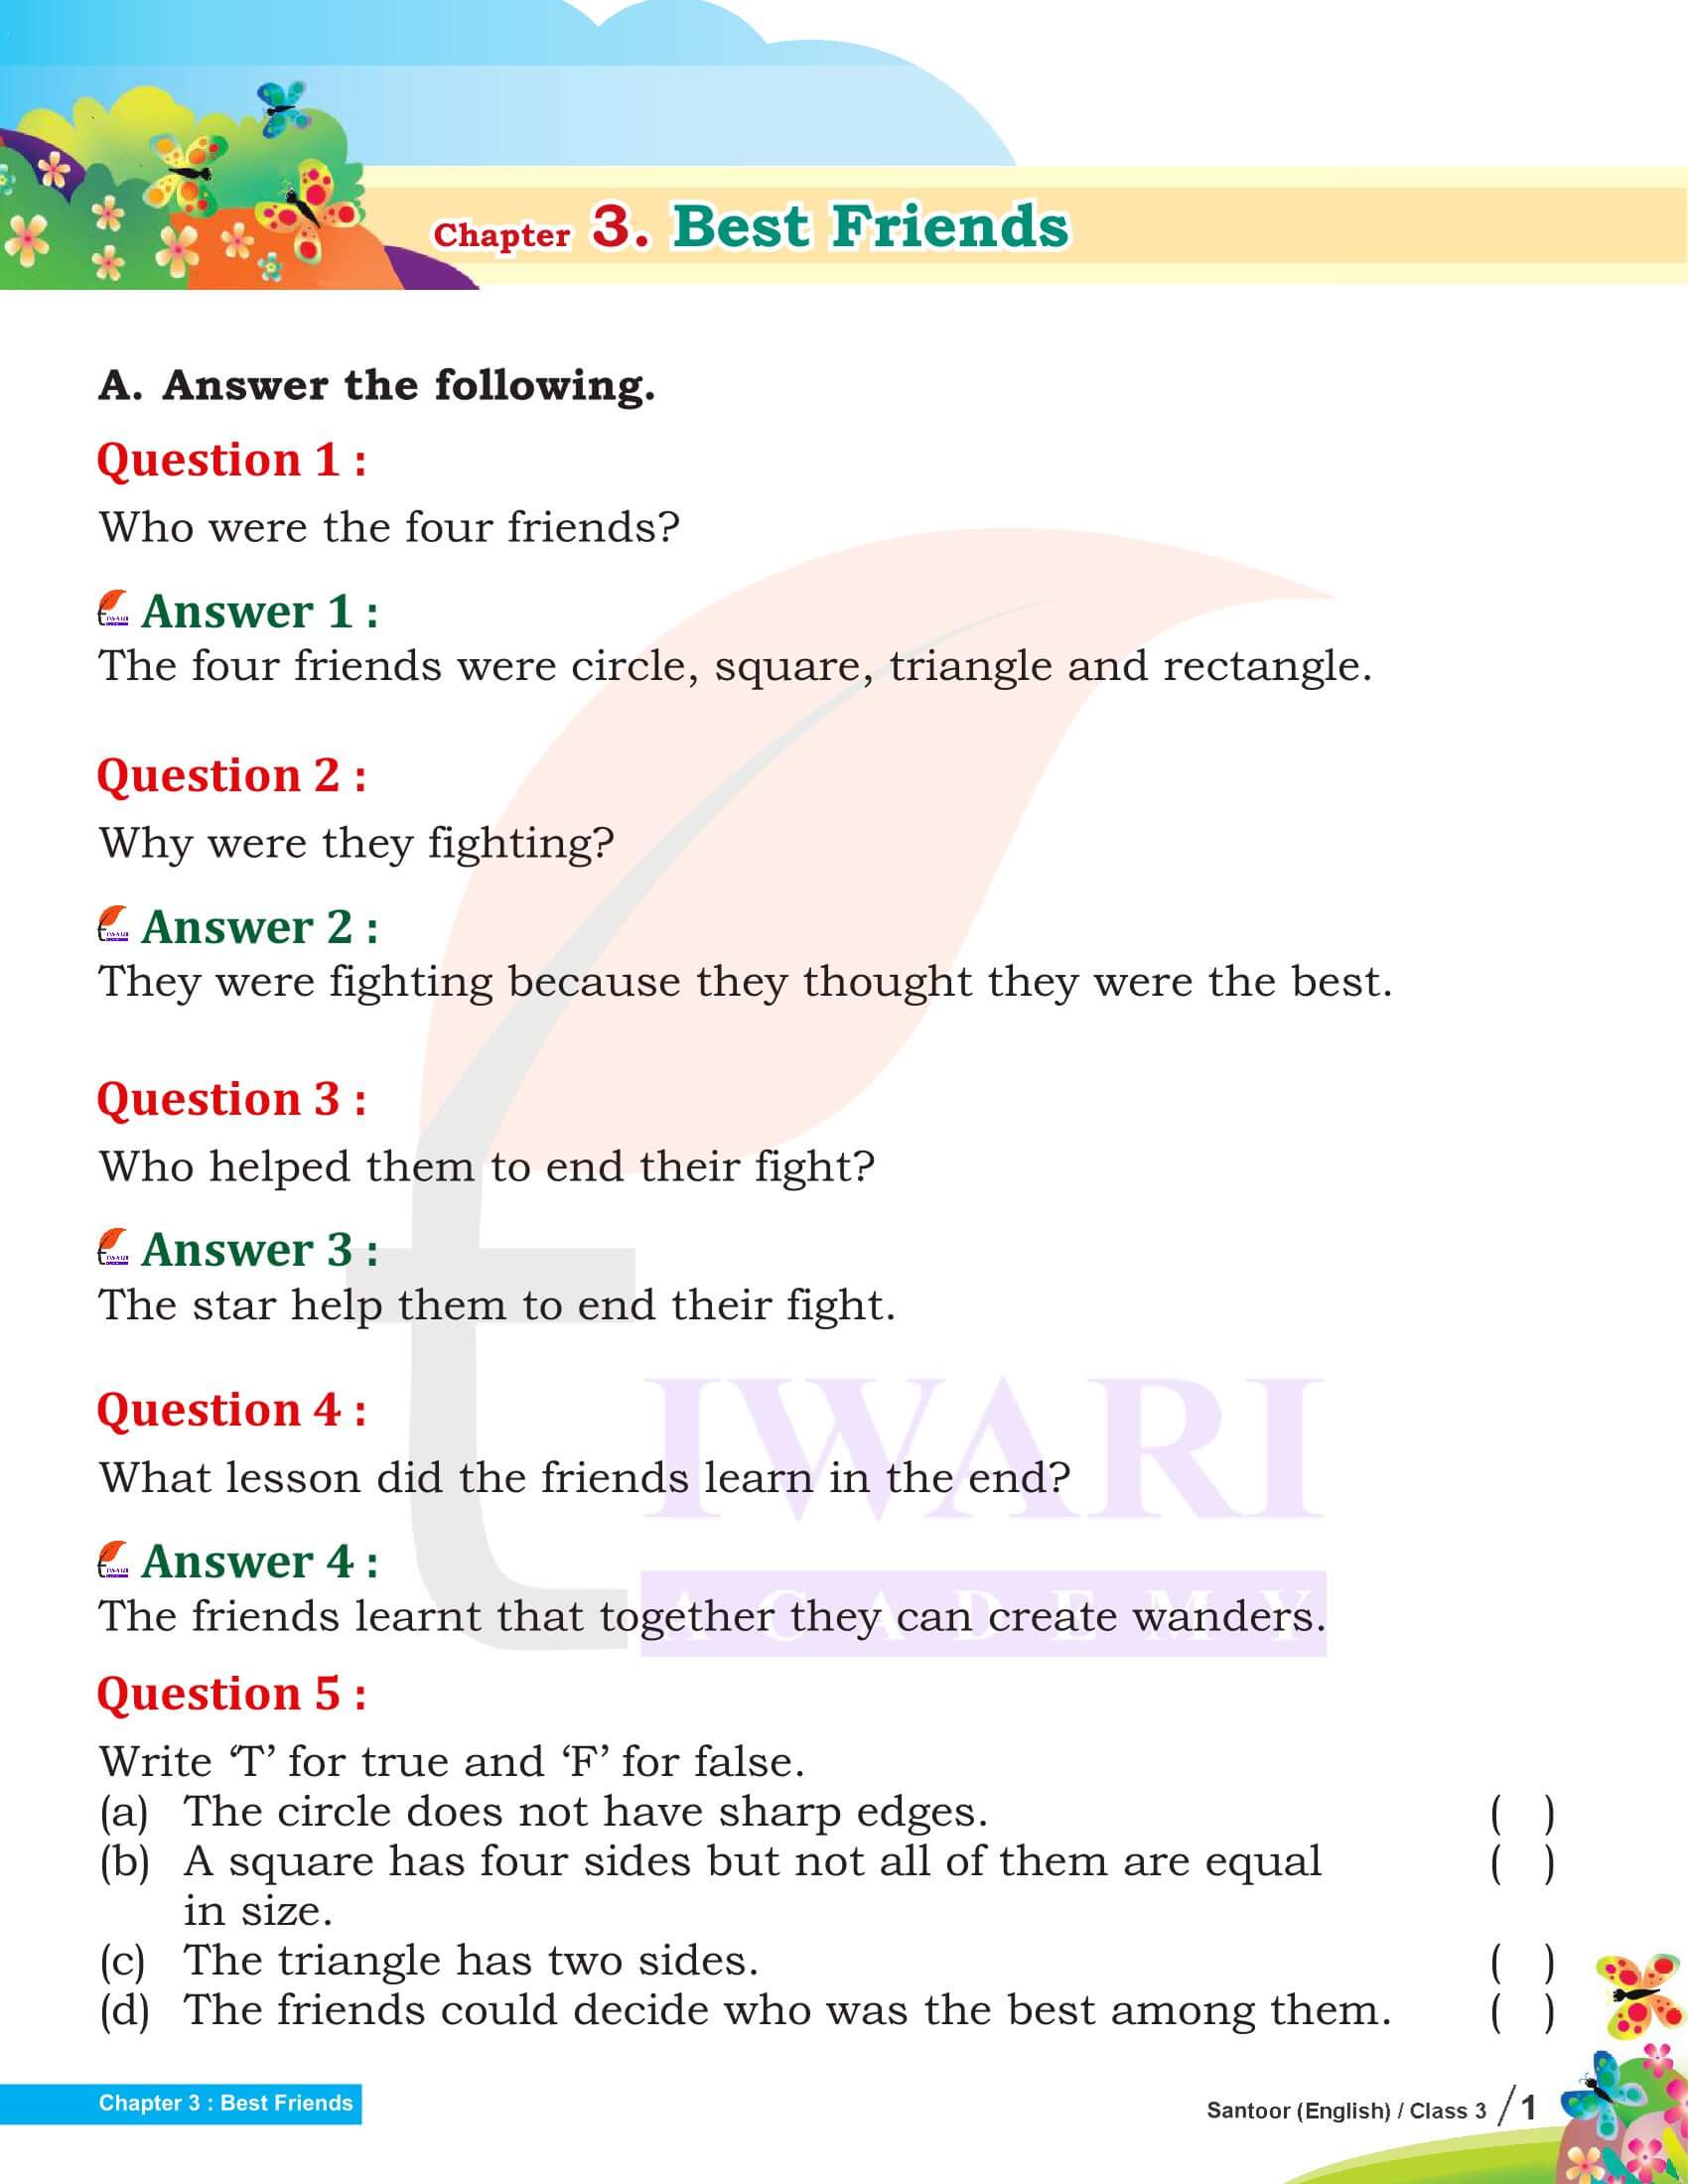 NCERT Solutions for Class 3 English Santoor Chapter 3 Best Friends Answers